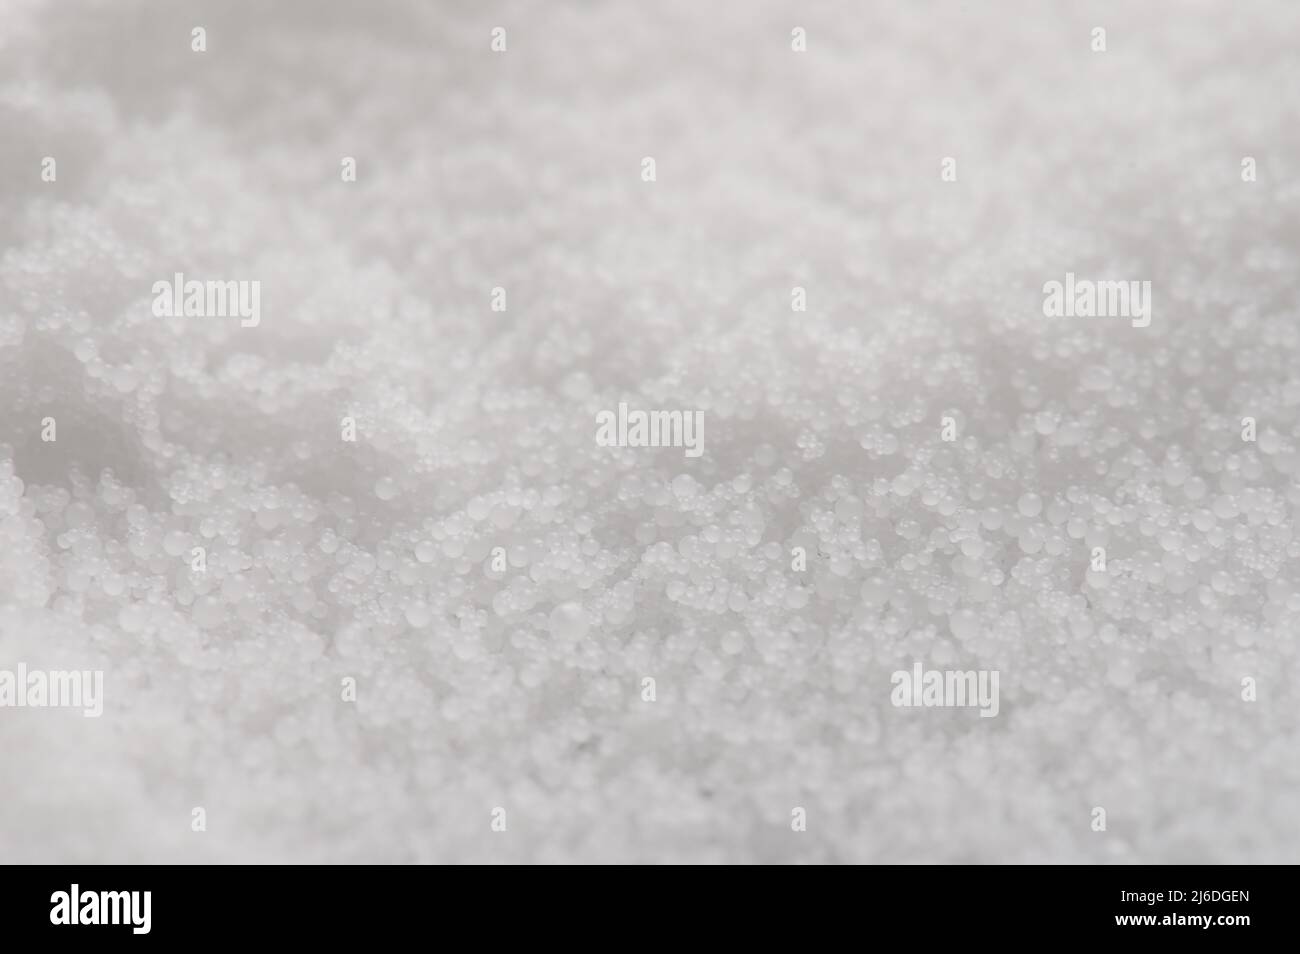 Macro of pattern white balls from chemichal industry Stock Photo